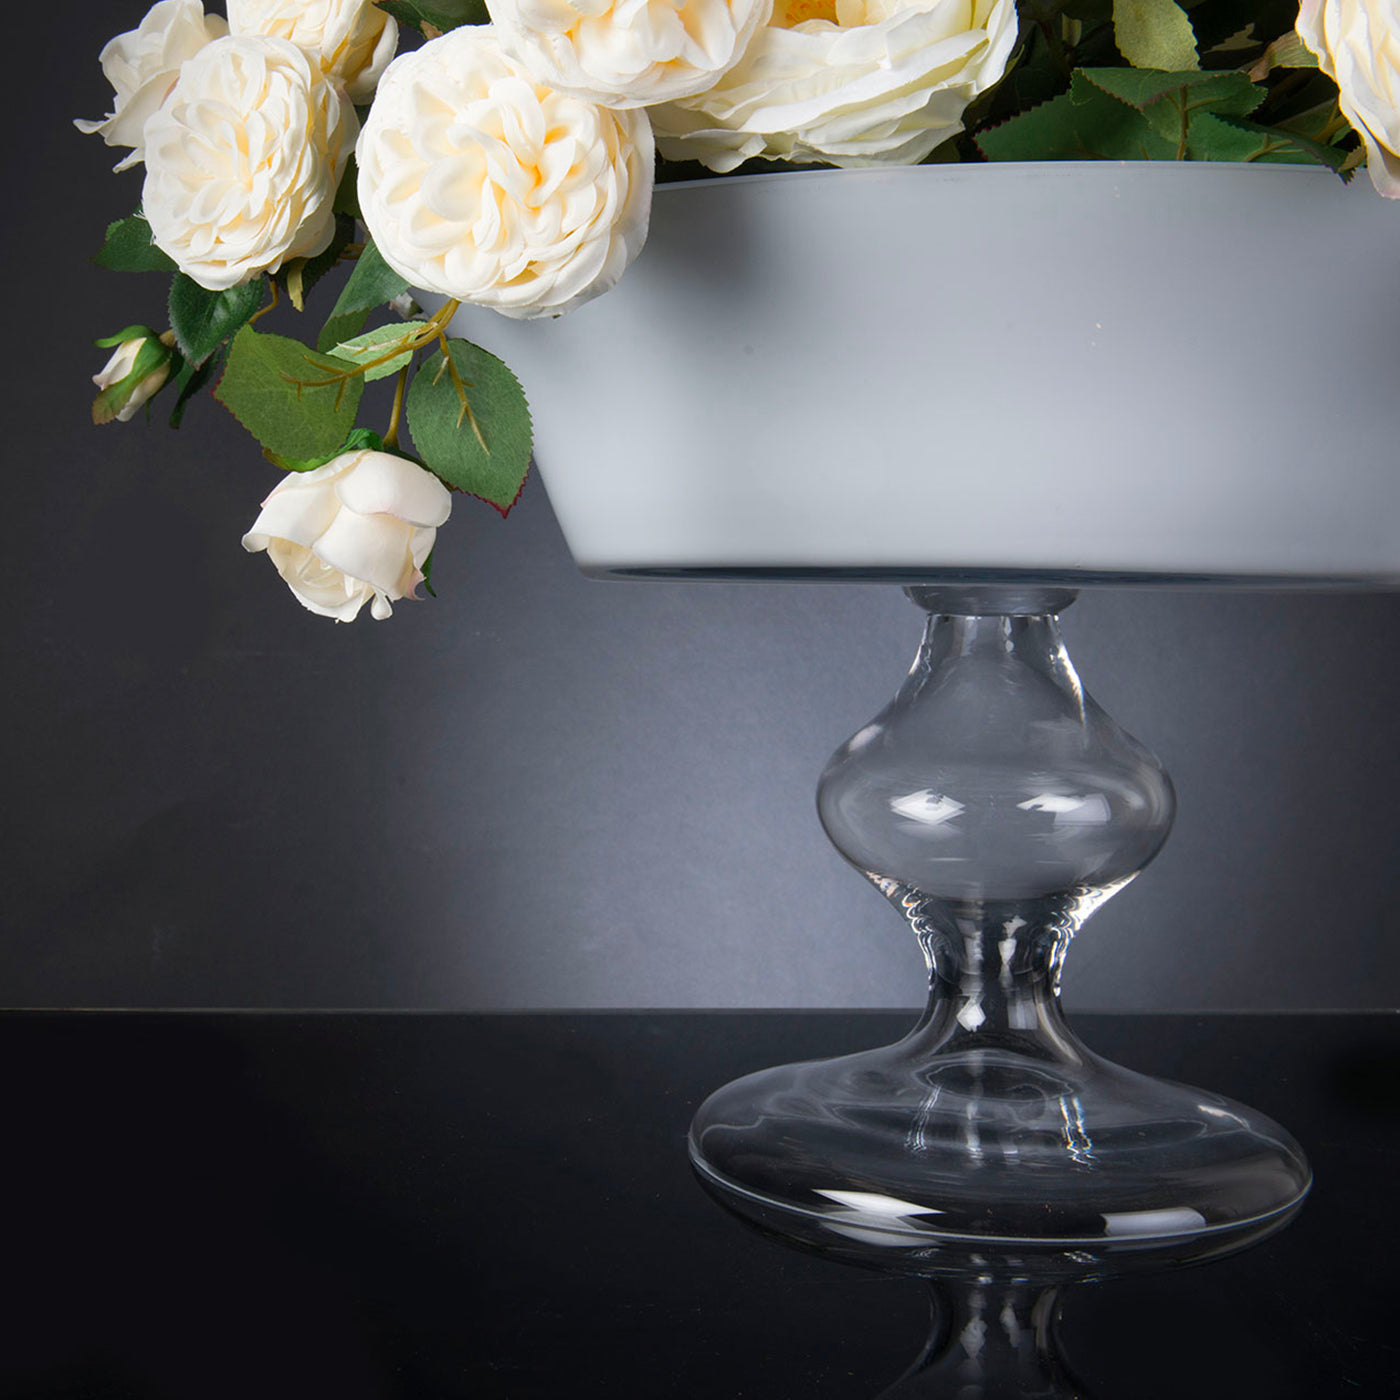 Camilla Roses Faux Floral Composition with Vase - Alternative view 2